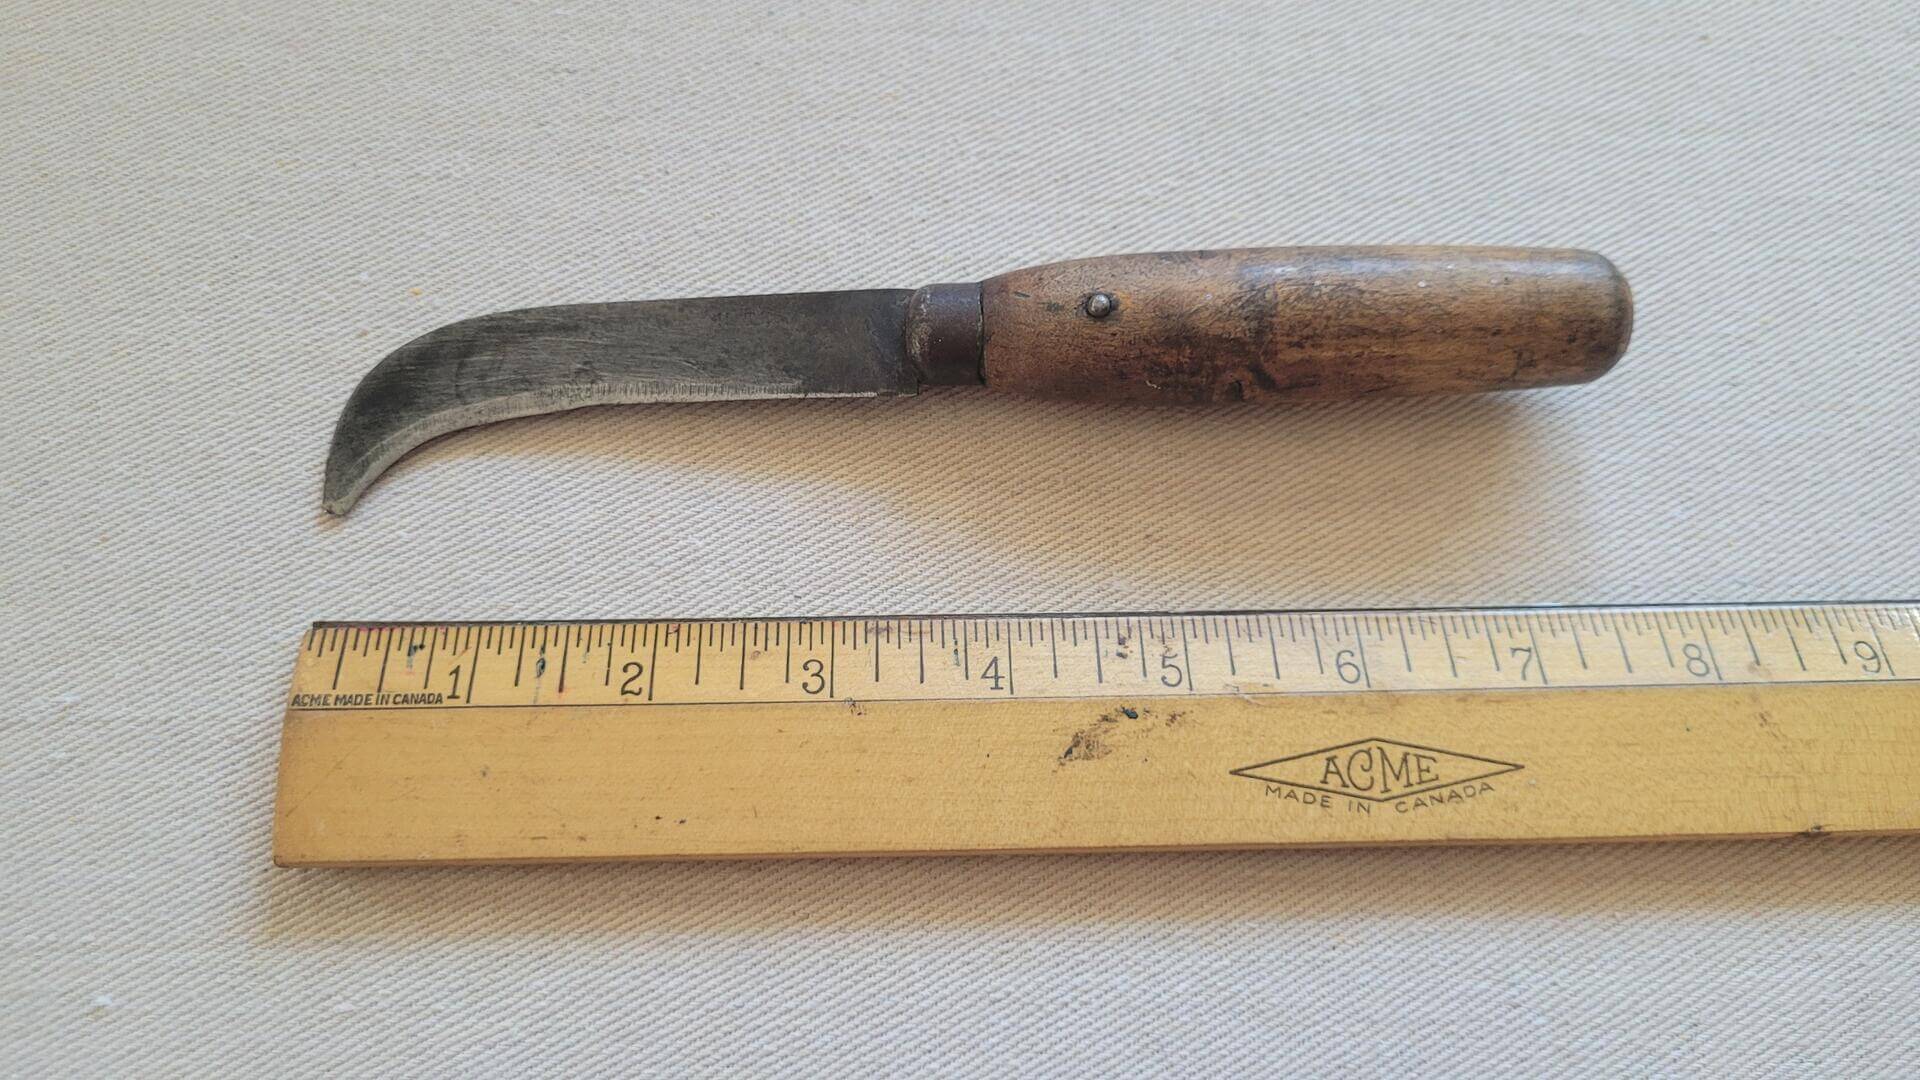 Antique H Thompson curved sharp point cobbler leather working and cutting knife. Vintege collectible made in Sheffield England collectible knives and shoe maker tools.